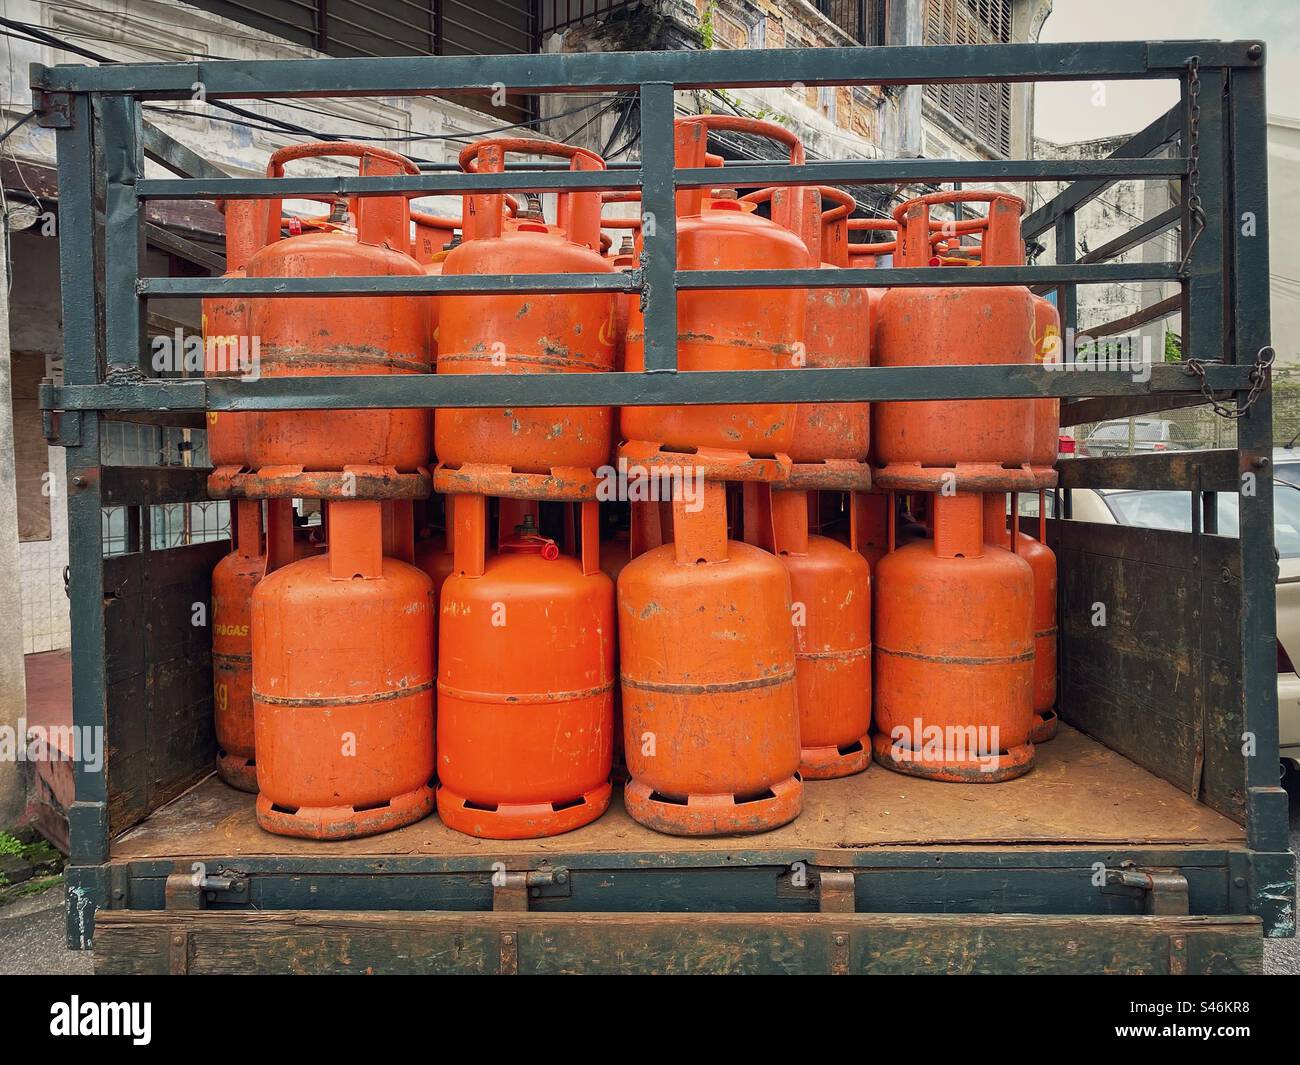 Propane gas bottles on a delivery truck Stock Photo